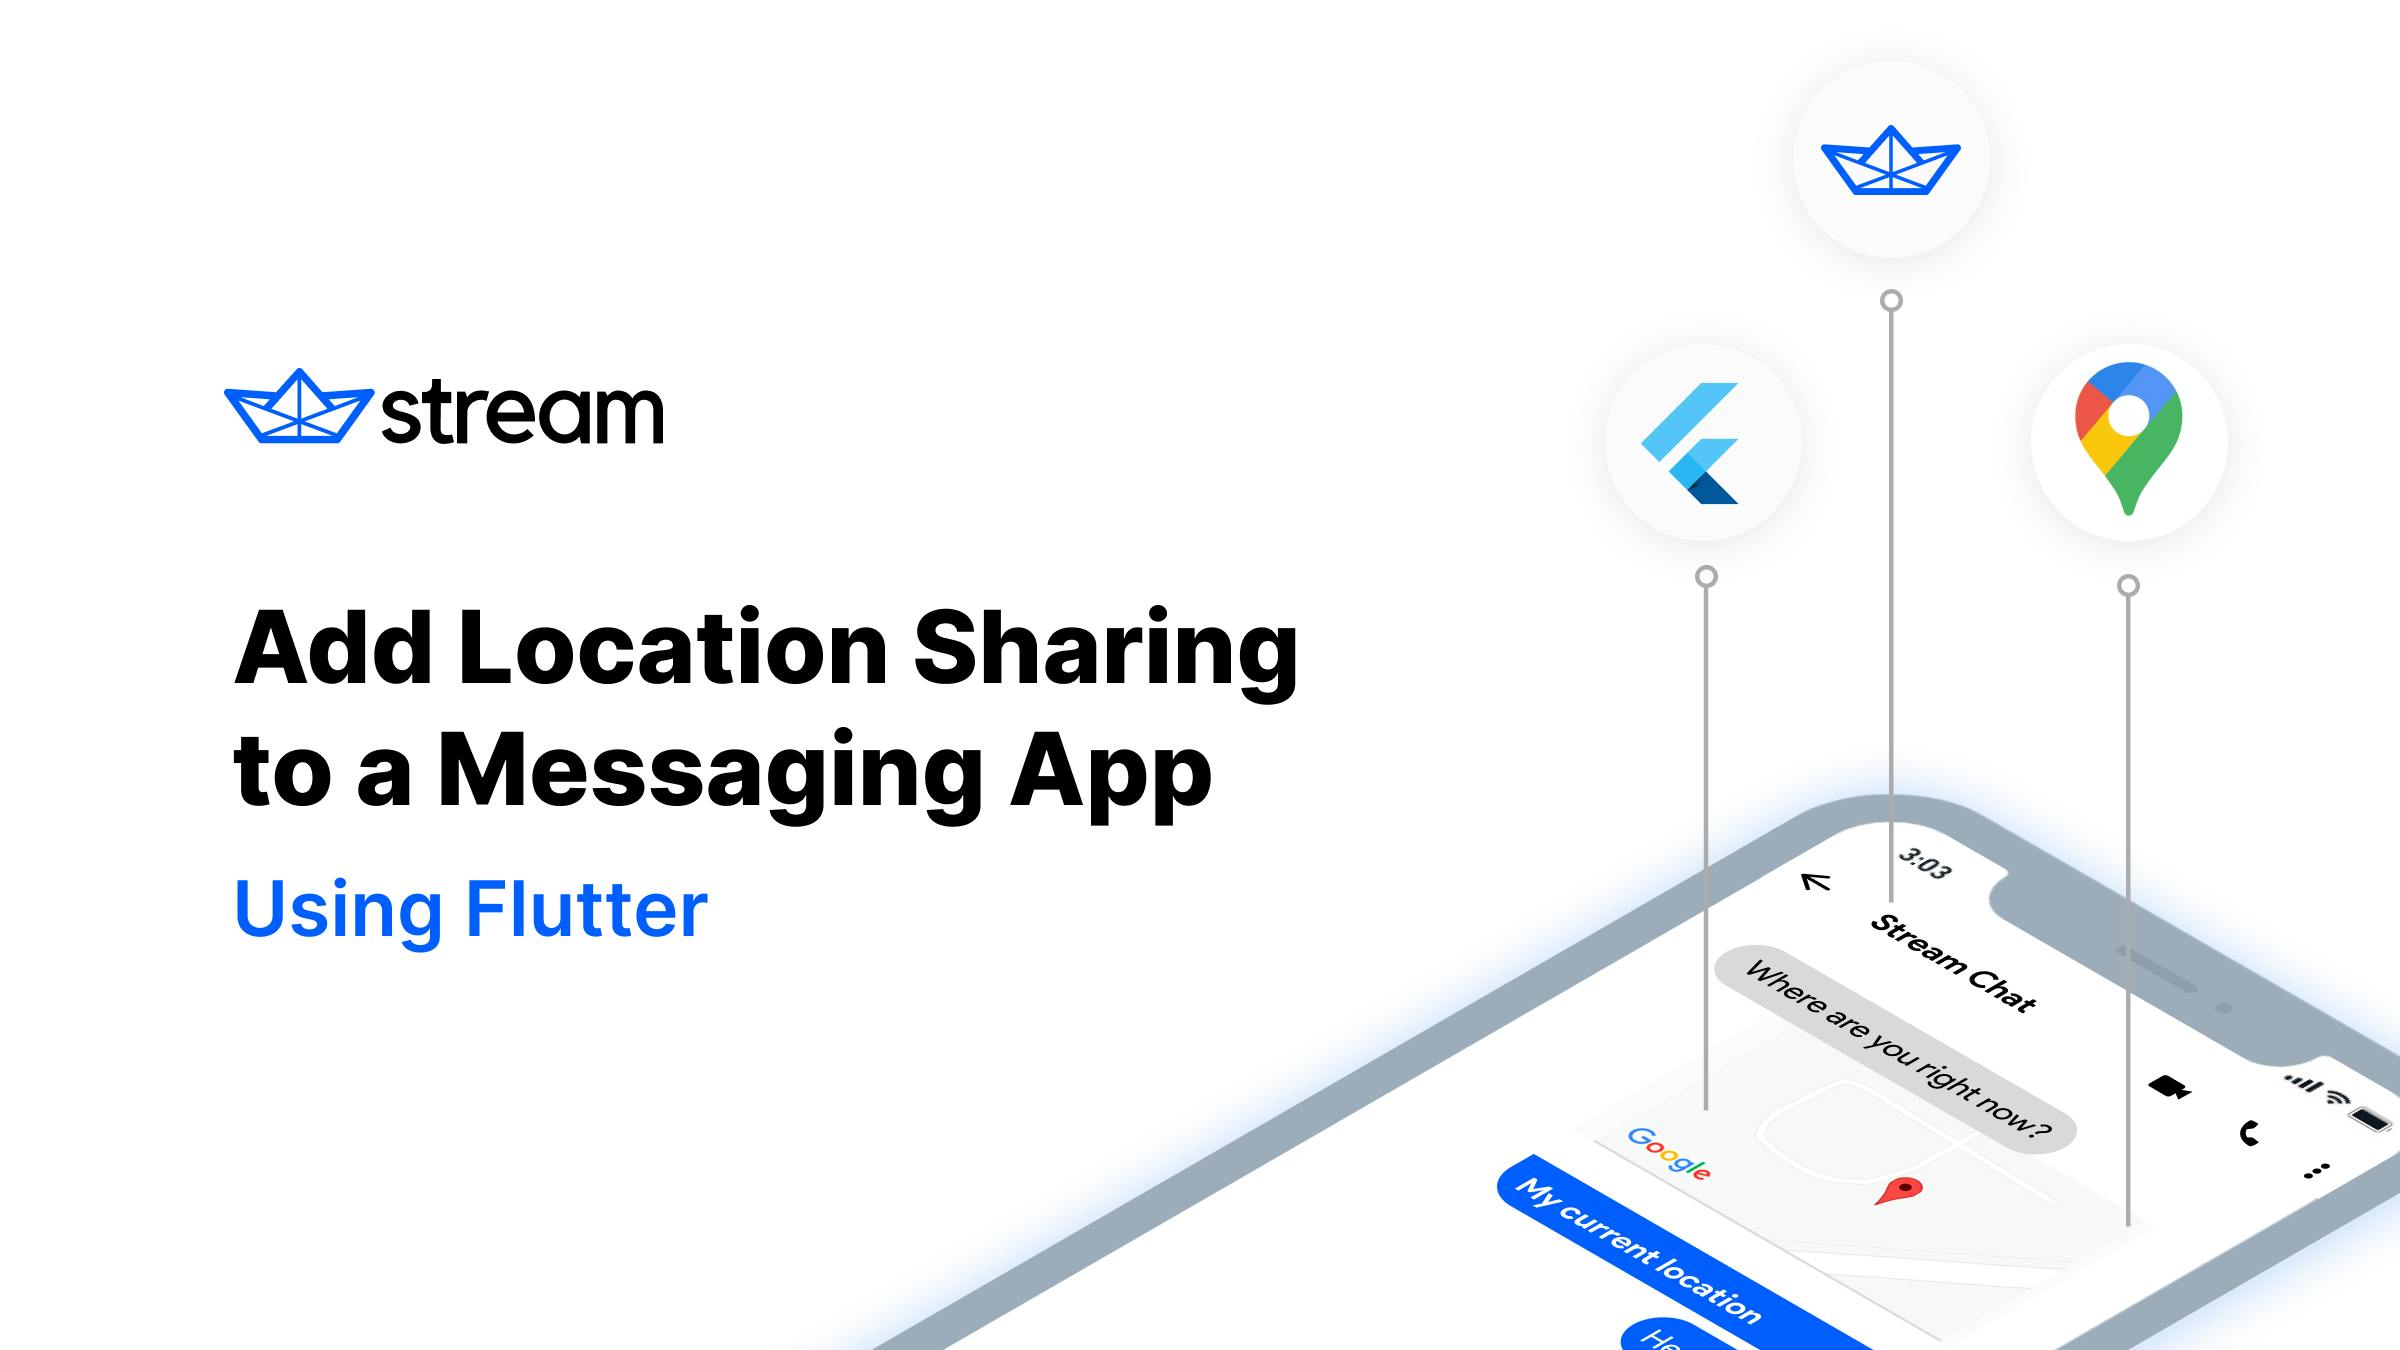 Add Location Sharing to a Messaging App Using Flutter